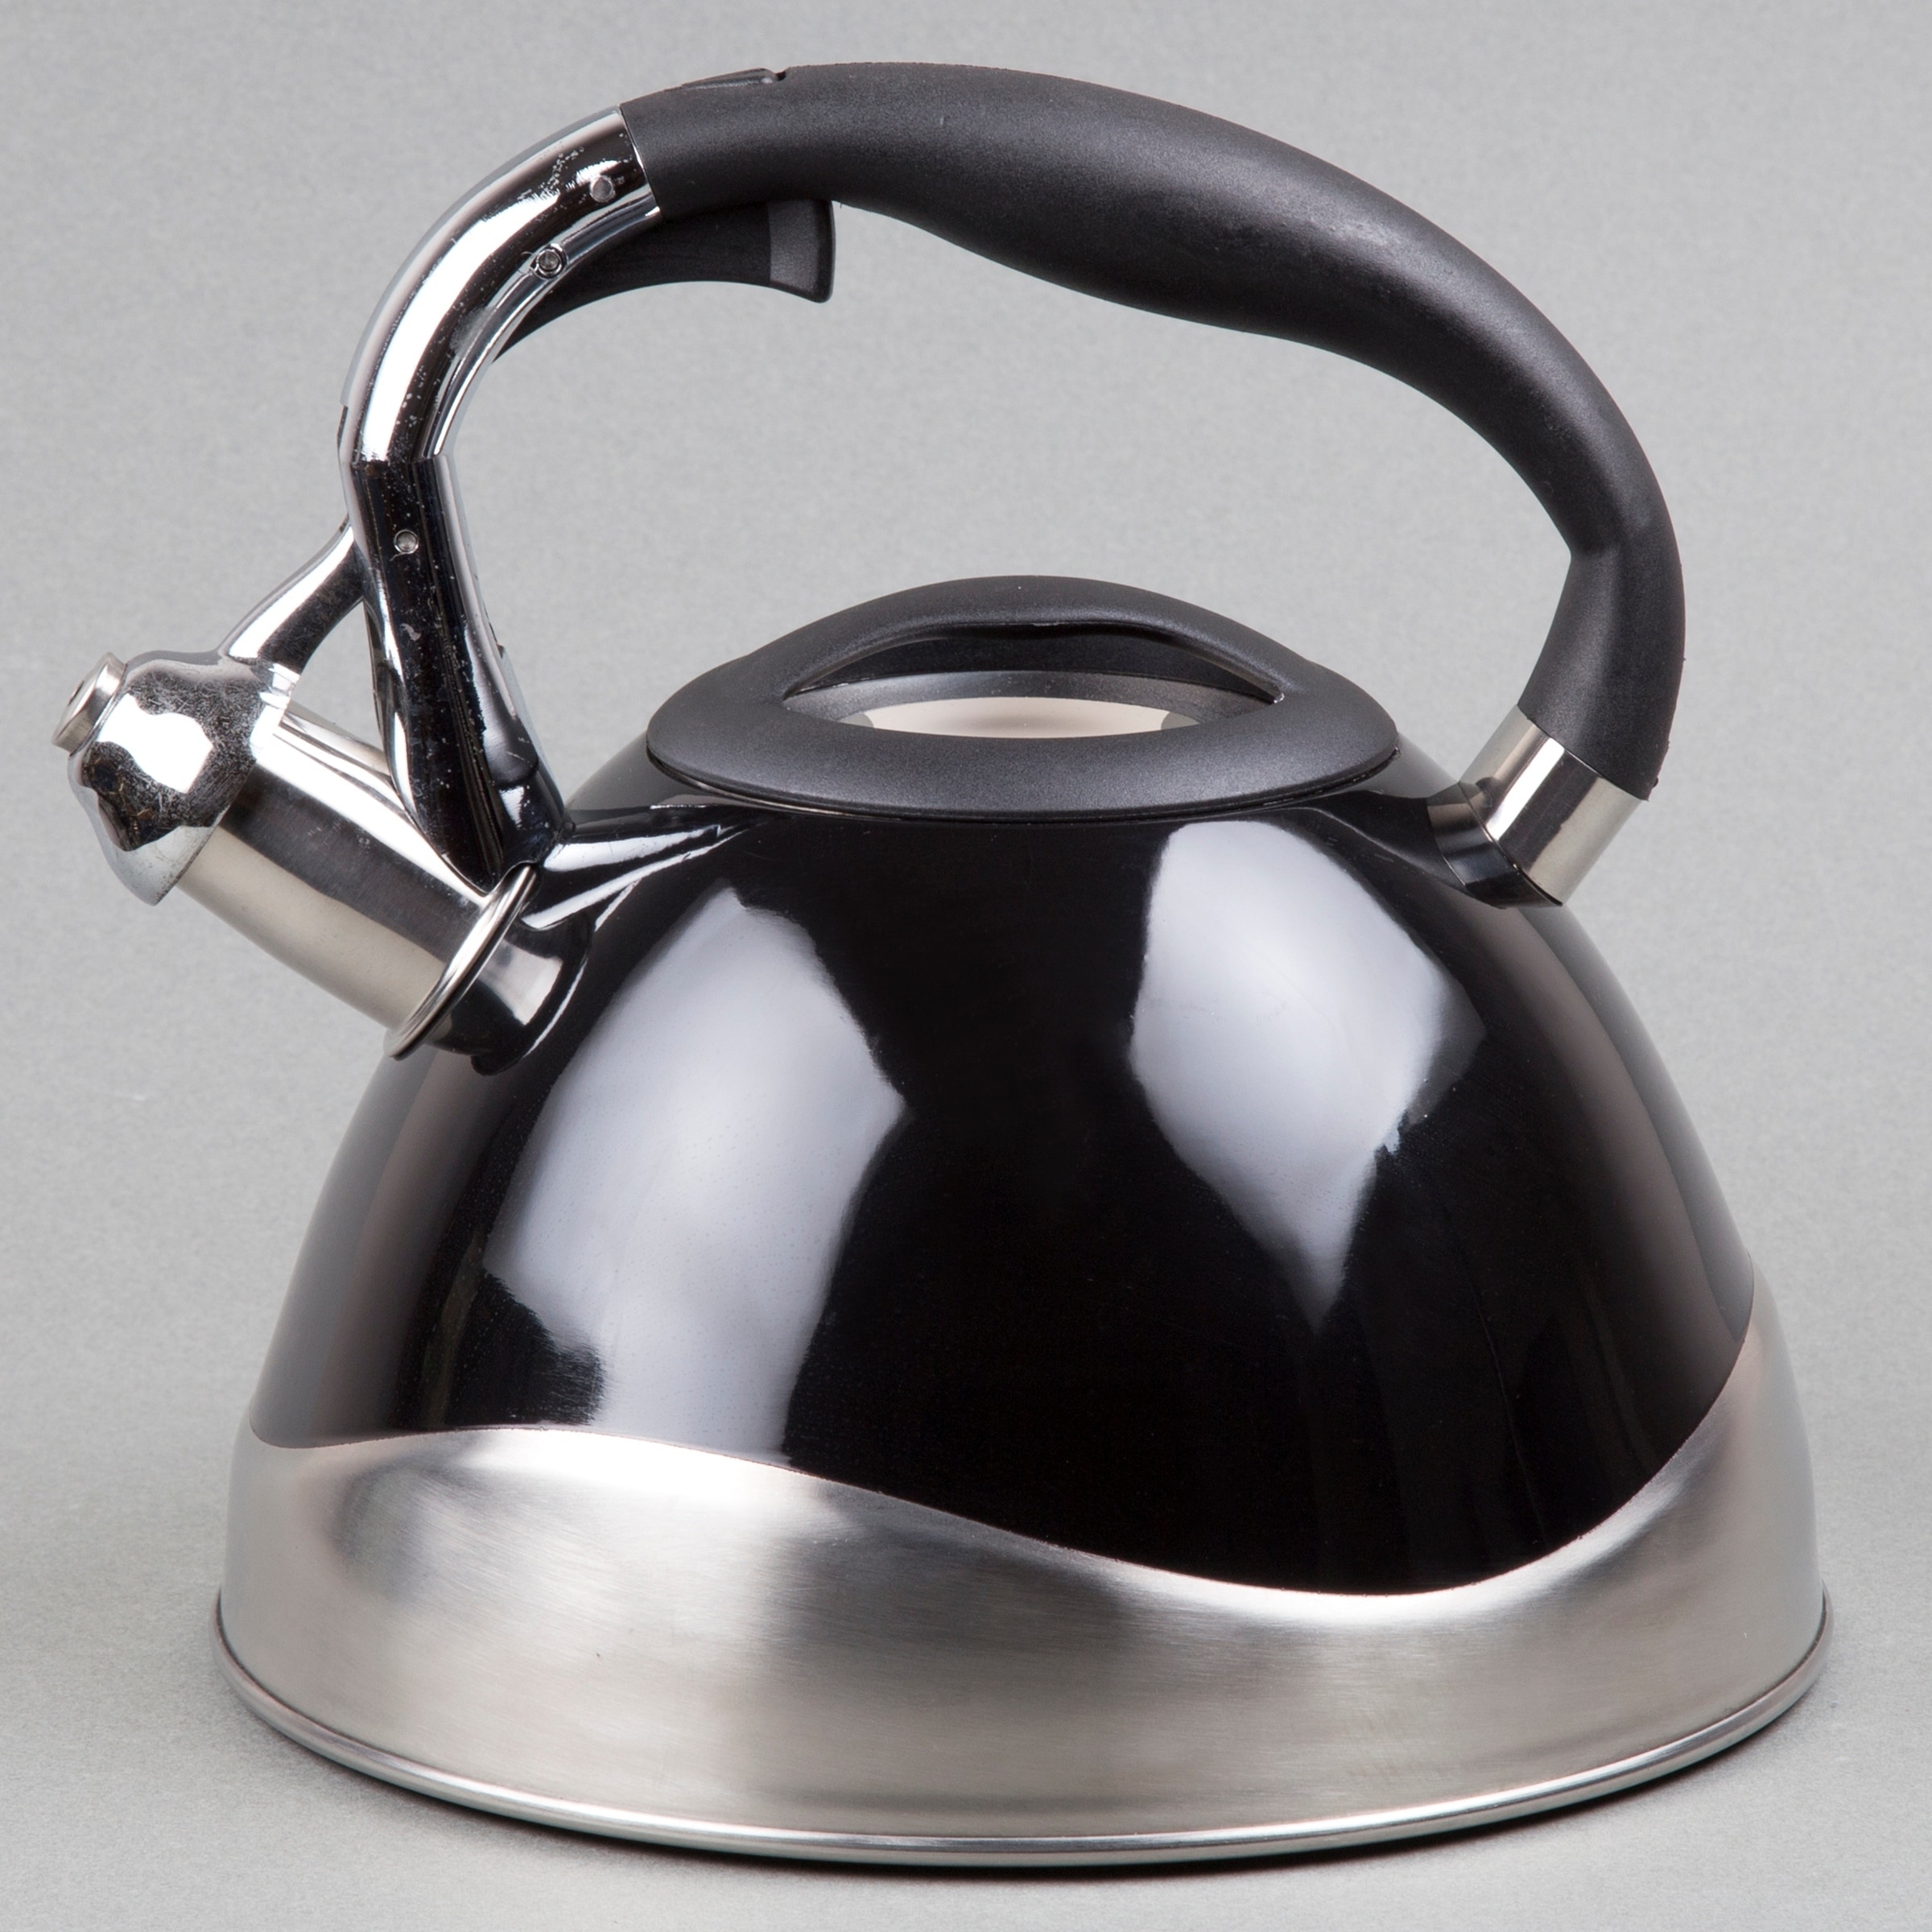 https://ak1.ostkcdn.com/images/products/10669175/Creative-Home-Crescendo-3.1-Qt-Whistling-Stainless-Steel-Powder-Coated-Black-Tea-Kettle-e544800a-8630-4268-aa2d-cbe8c5bcc82f.jpg